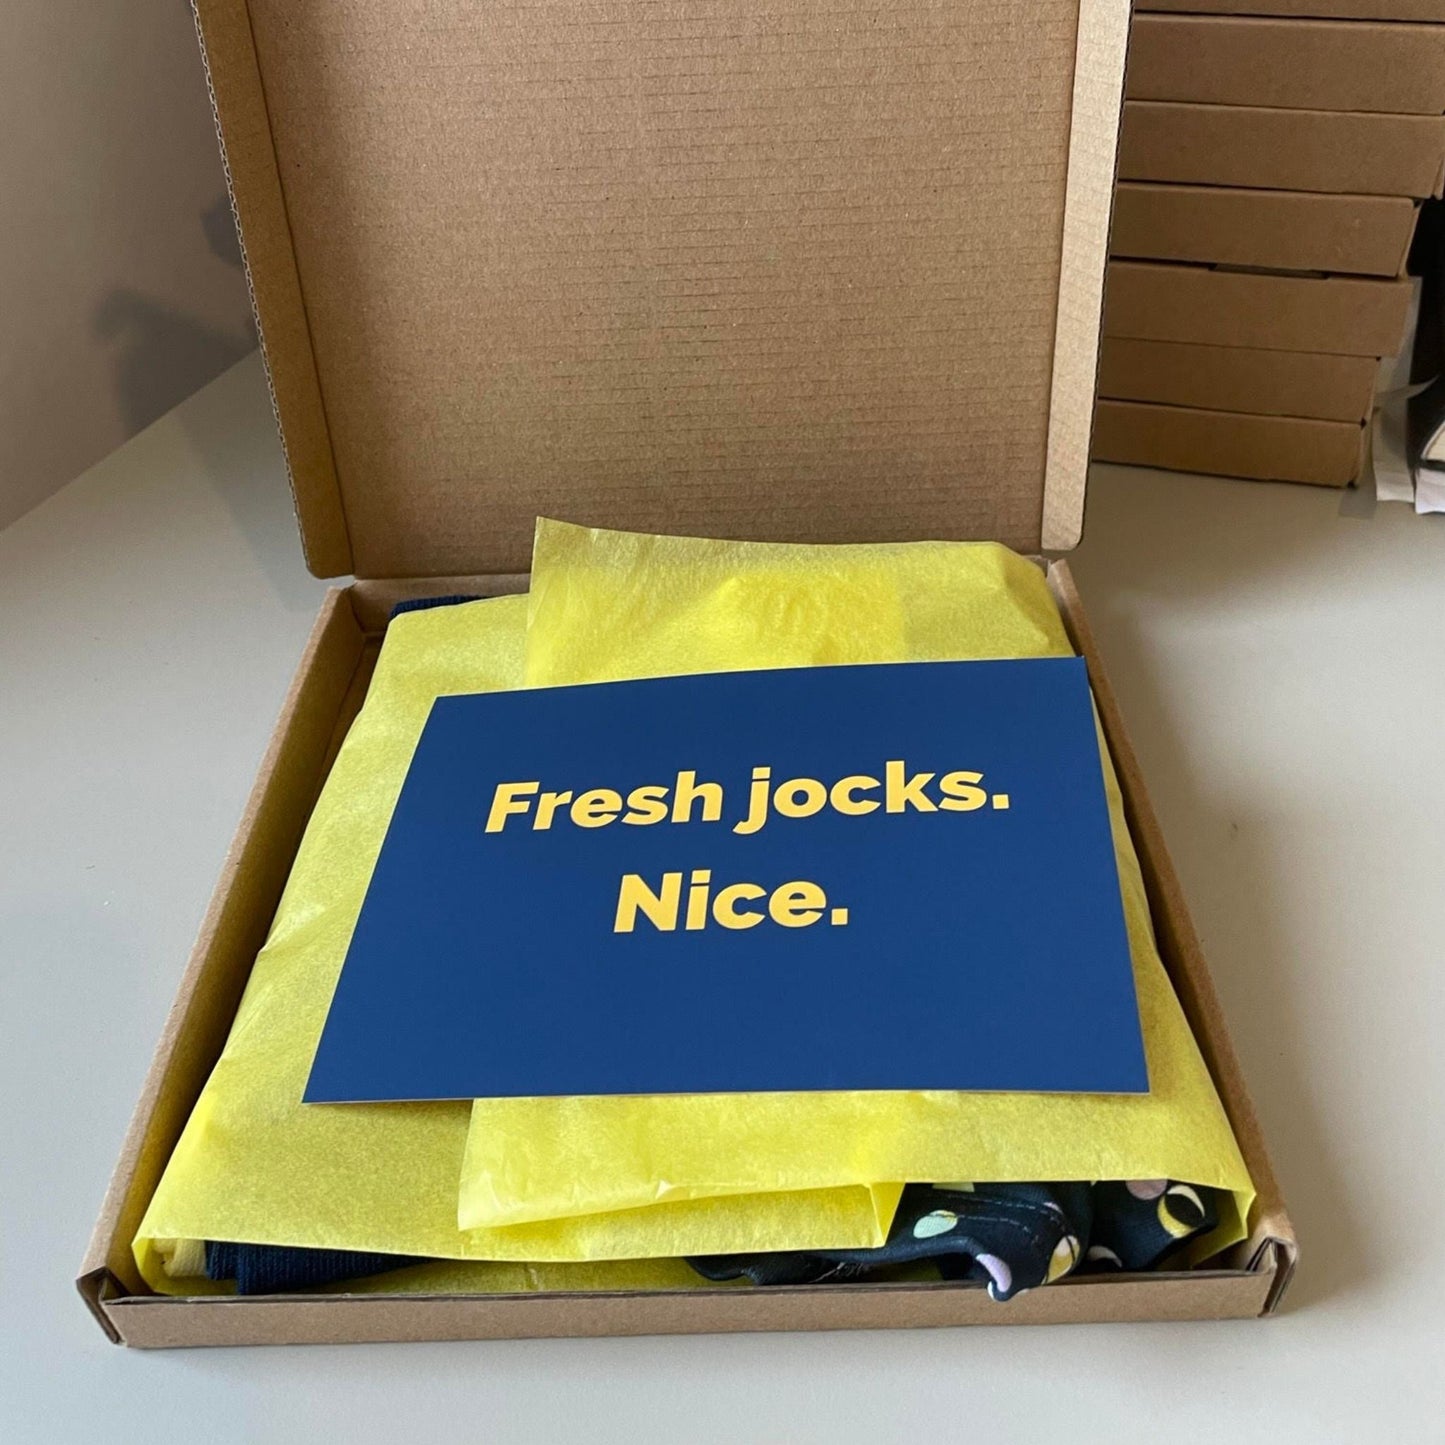 Try Letterbox Jox - Socks & Boxers Trial Box for New Customers